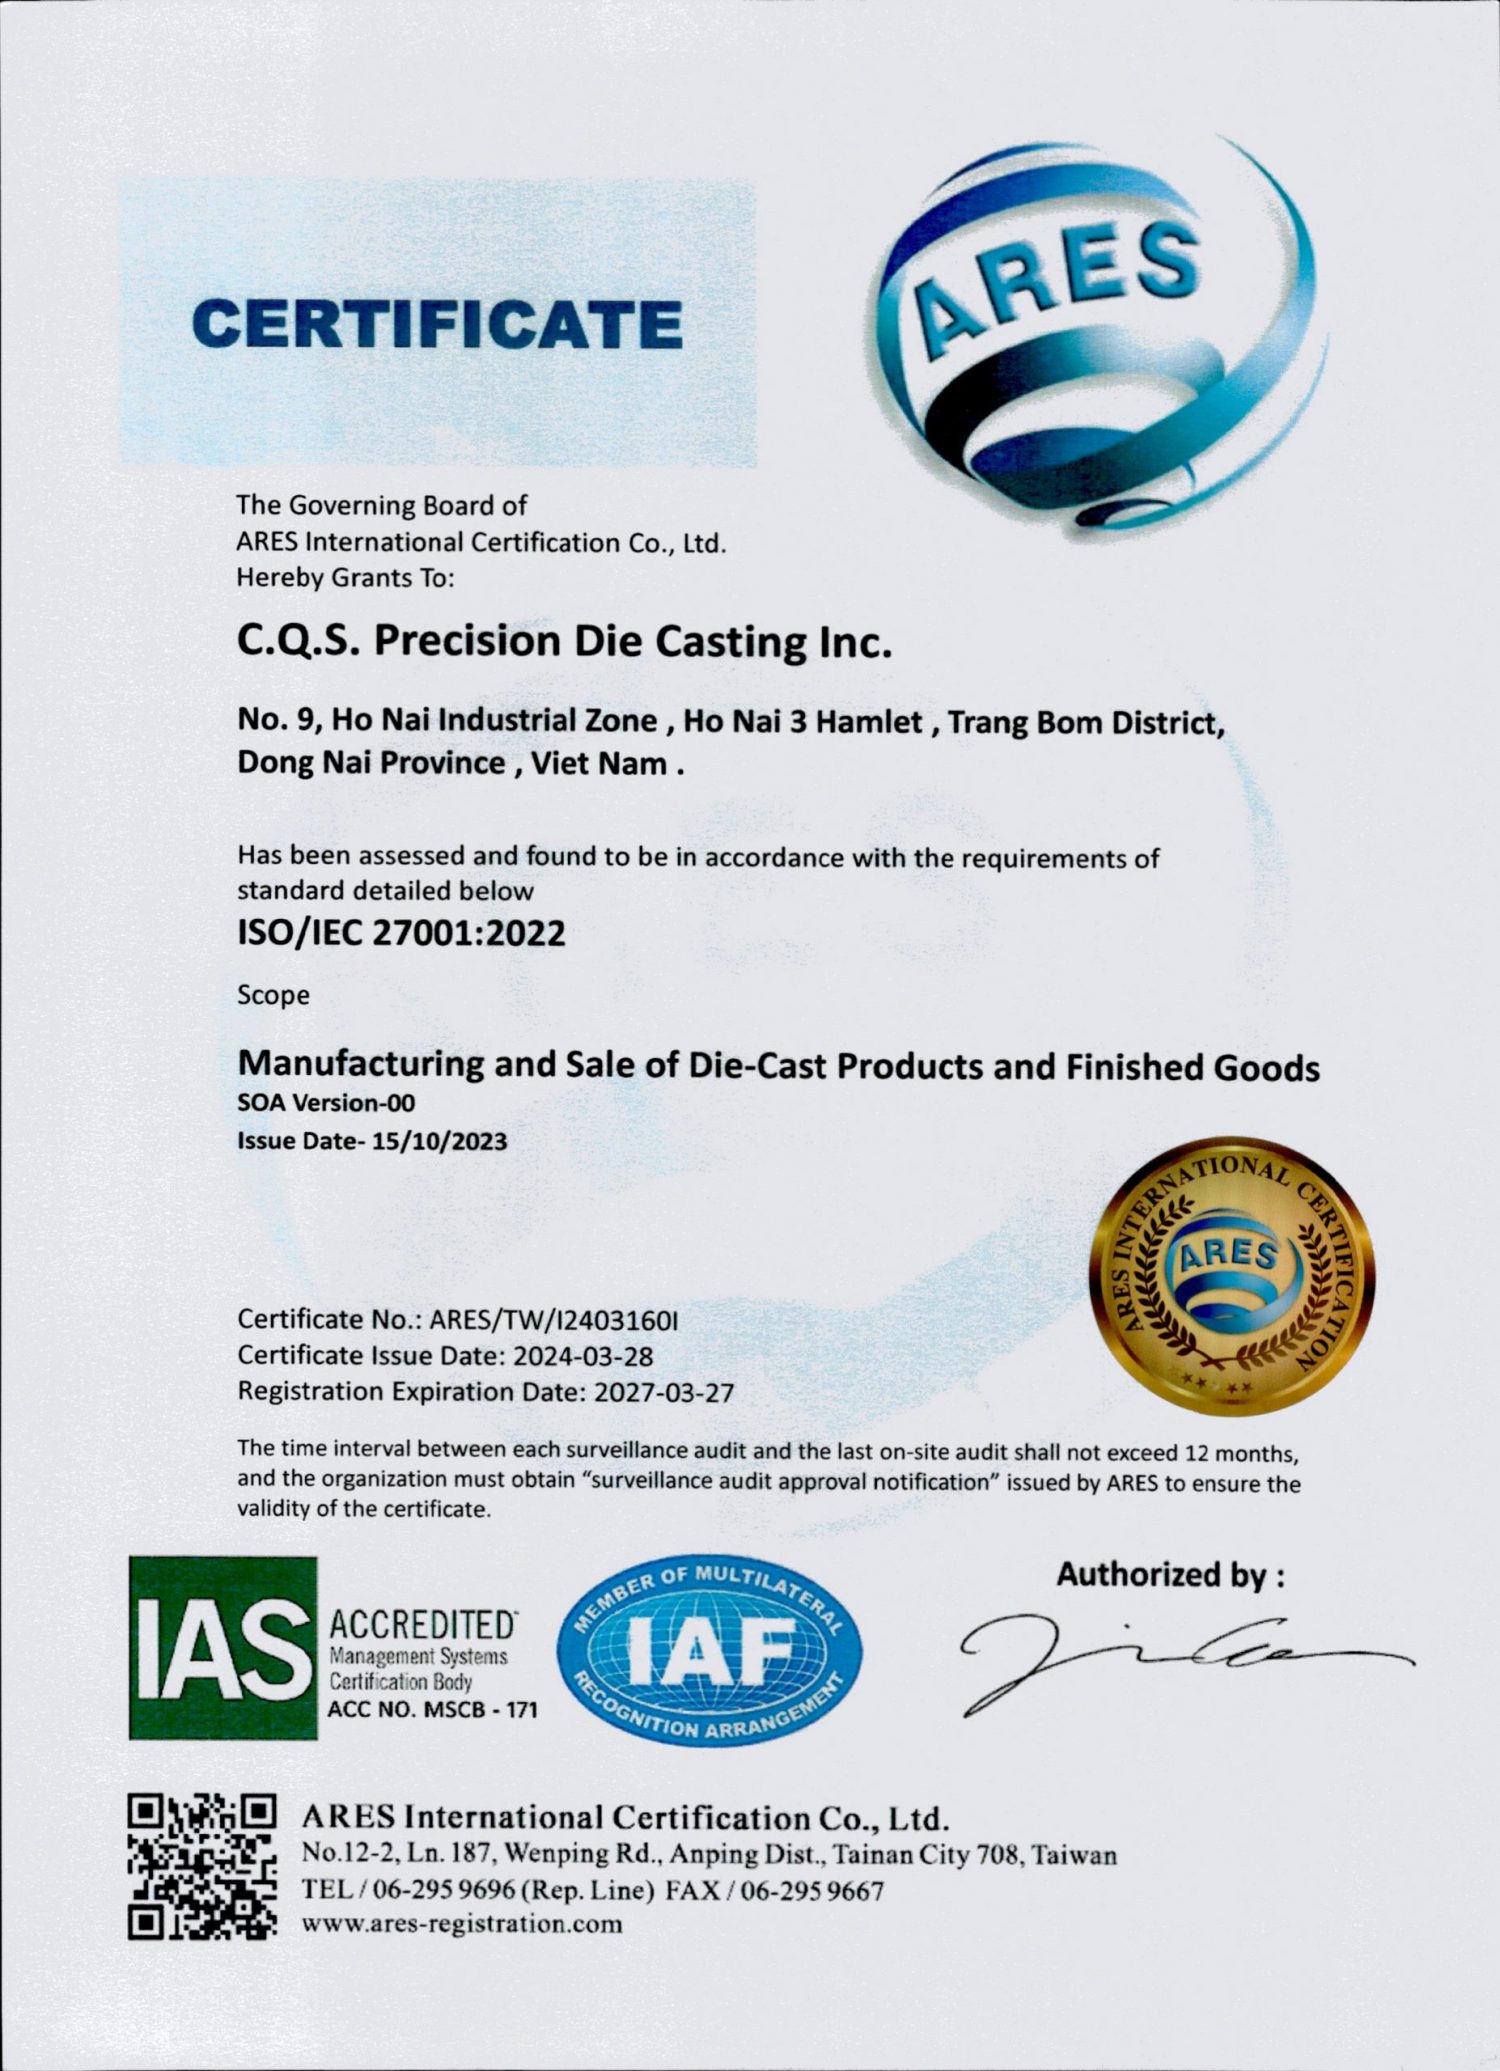 CQS COMPANY RECEIVED ISO/IEC 27001:2022 CERTIFICATE